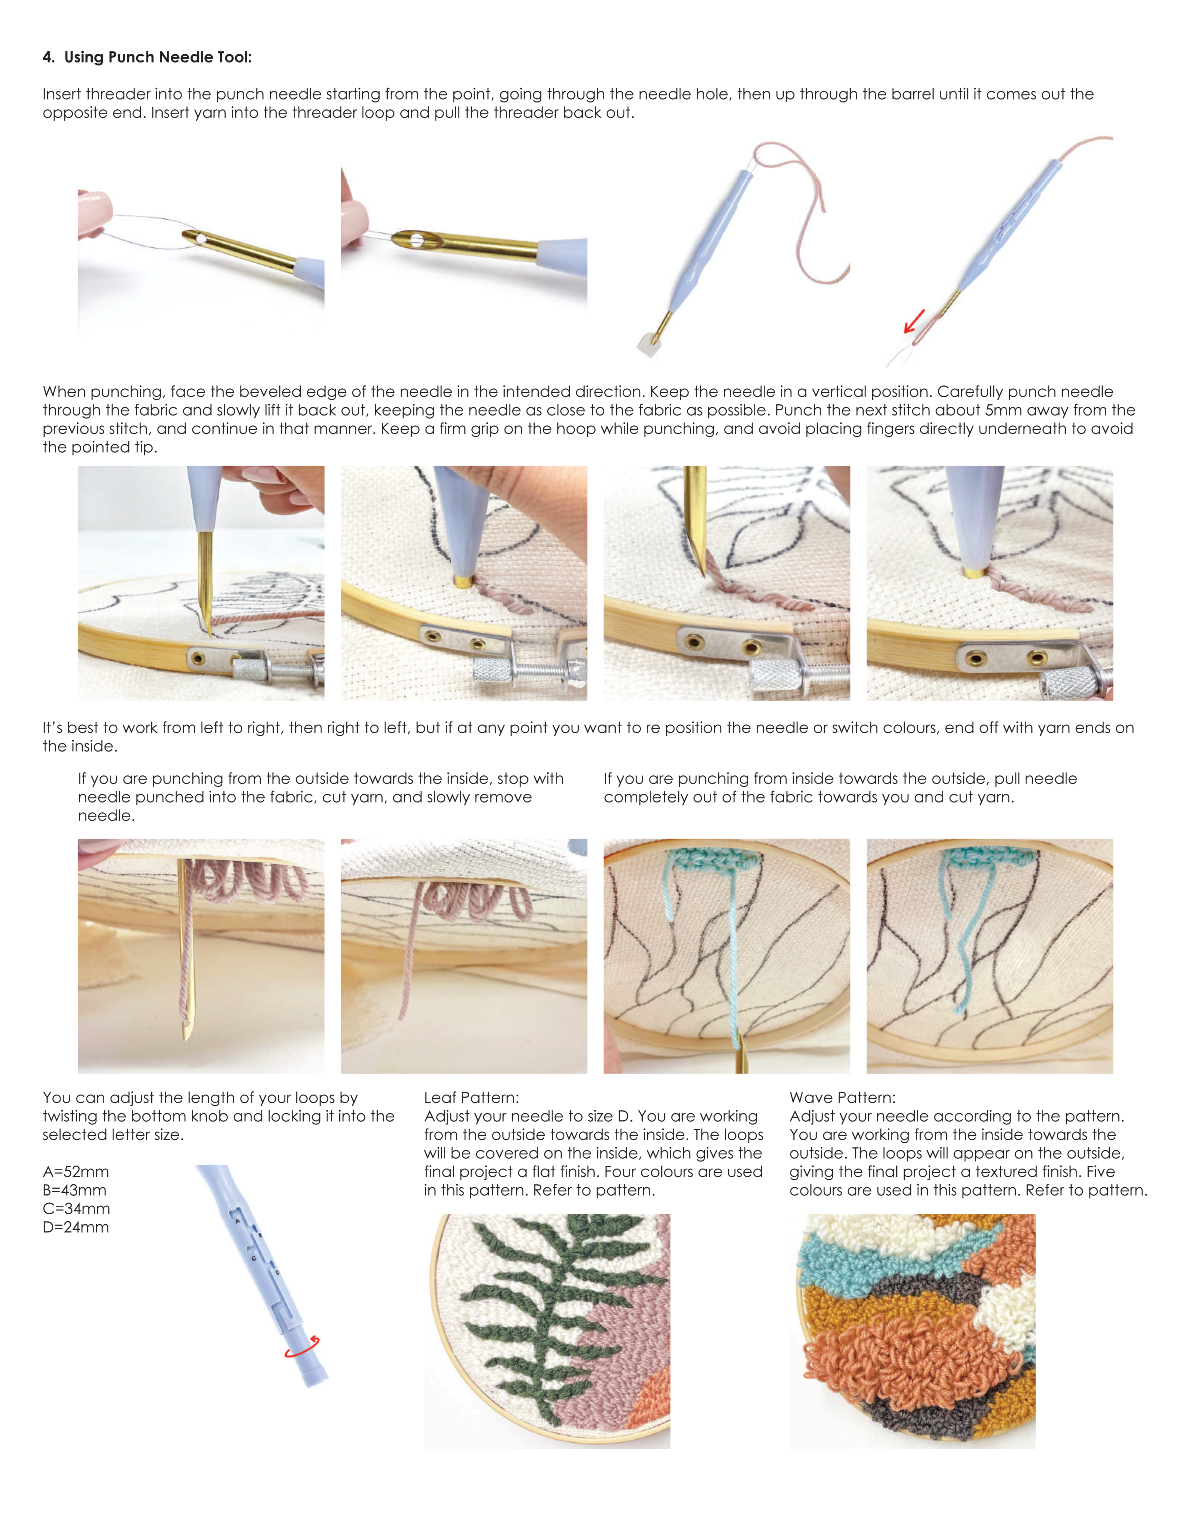 Steps to create your DIY Punch Needle